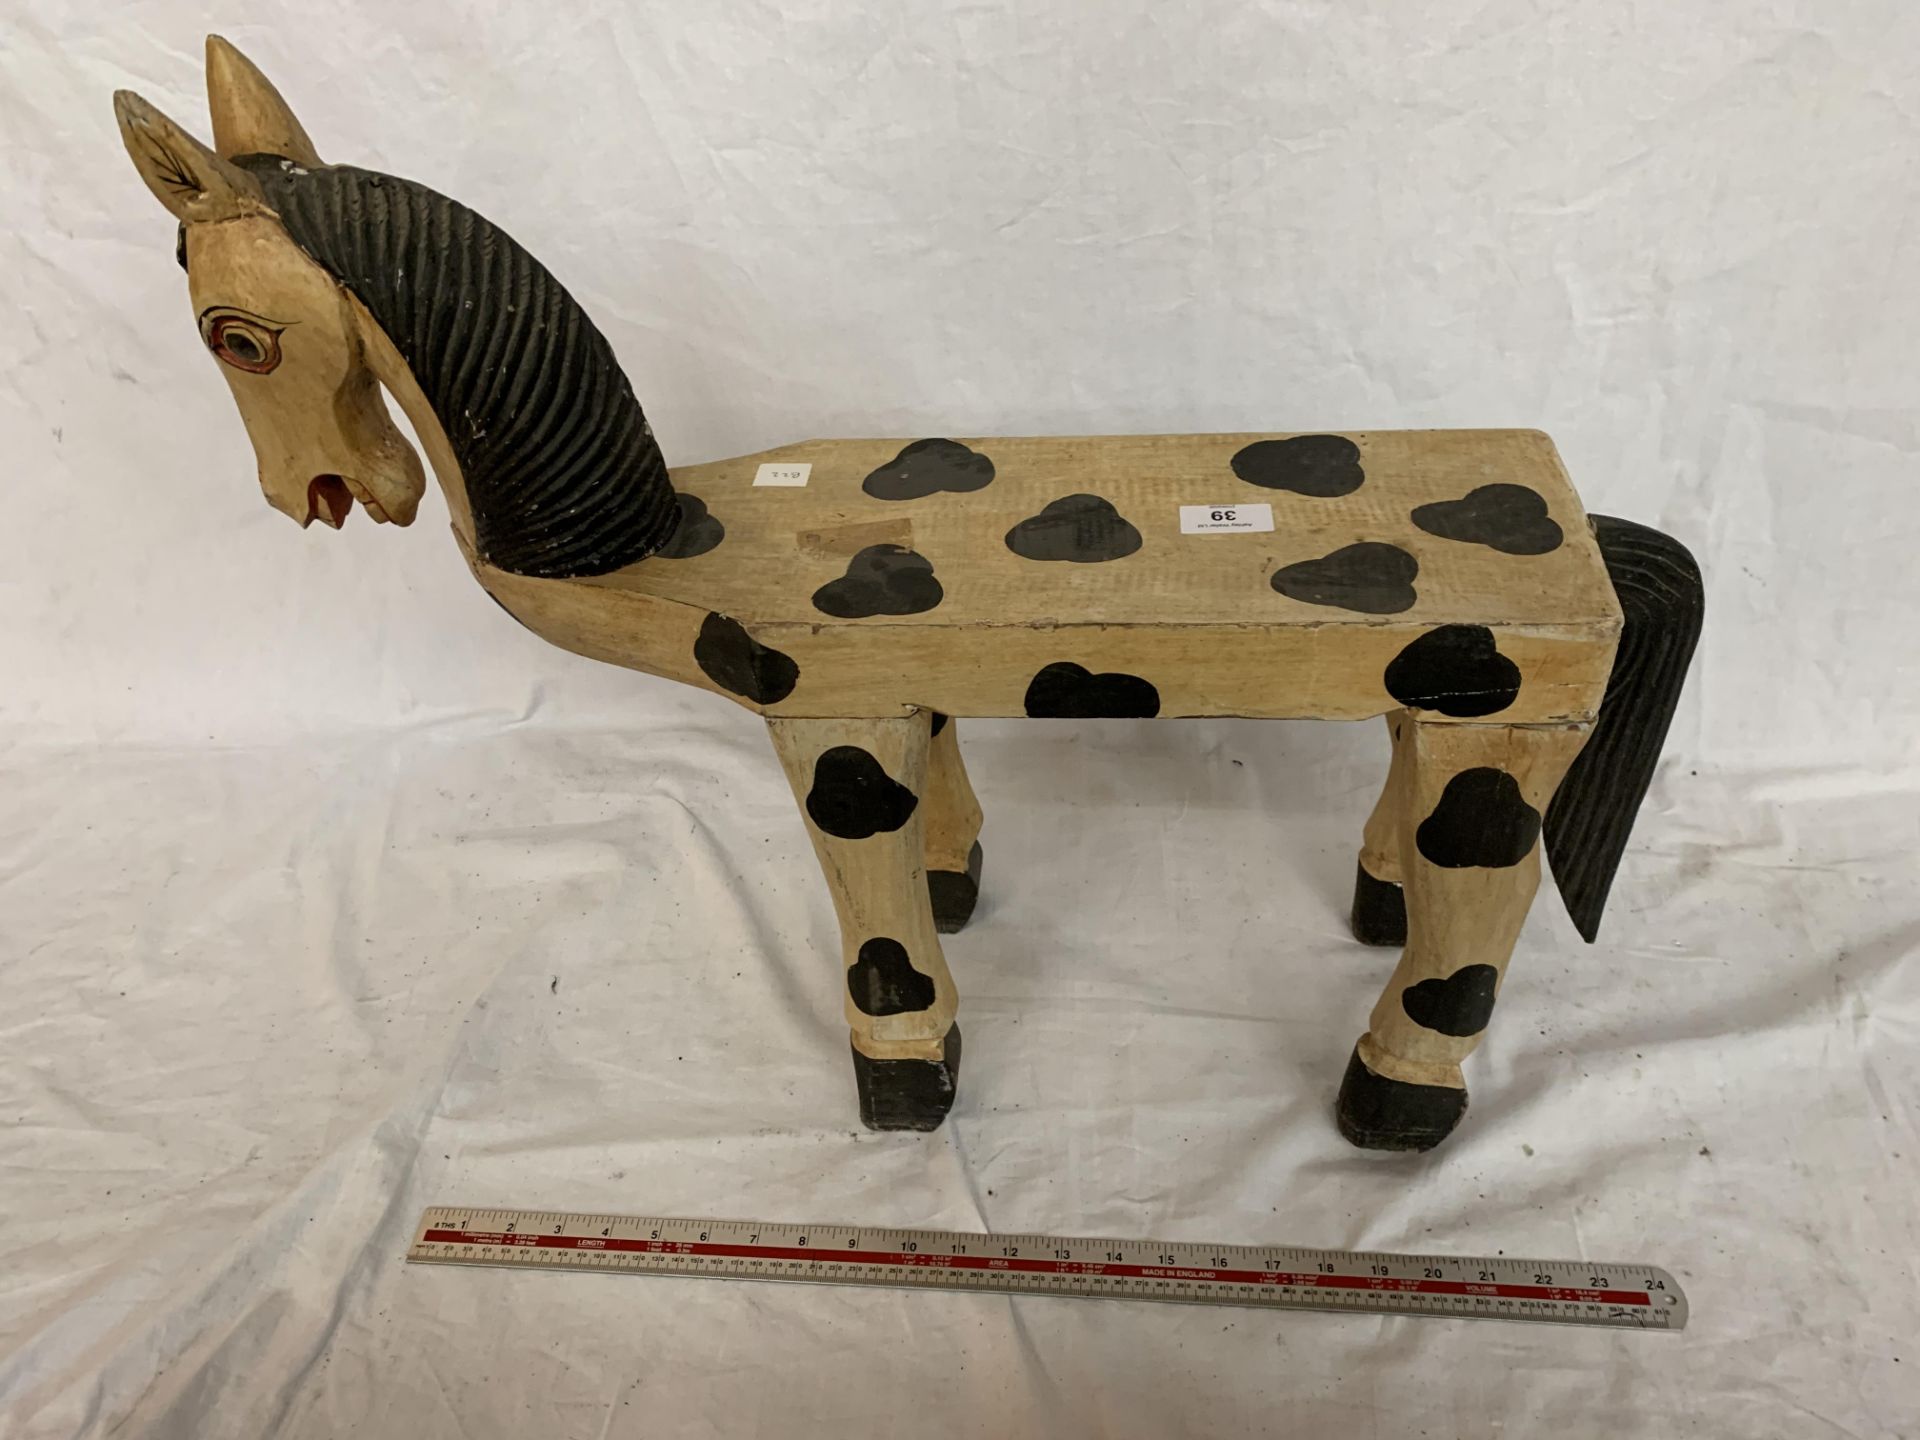 A WOODEN STOOL IN THE FORM OF A HORSE PAINTED IN THE STYLE OF AN APPALOOSA - Image 6 of 6